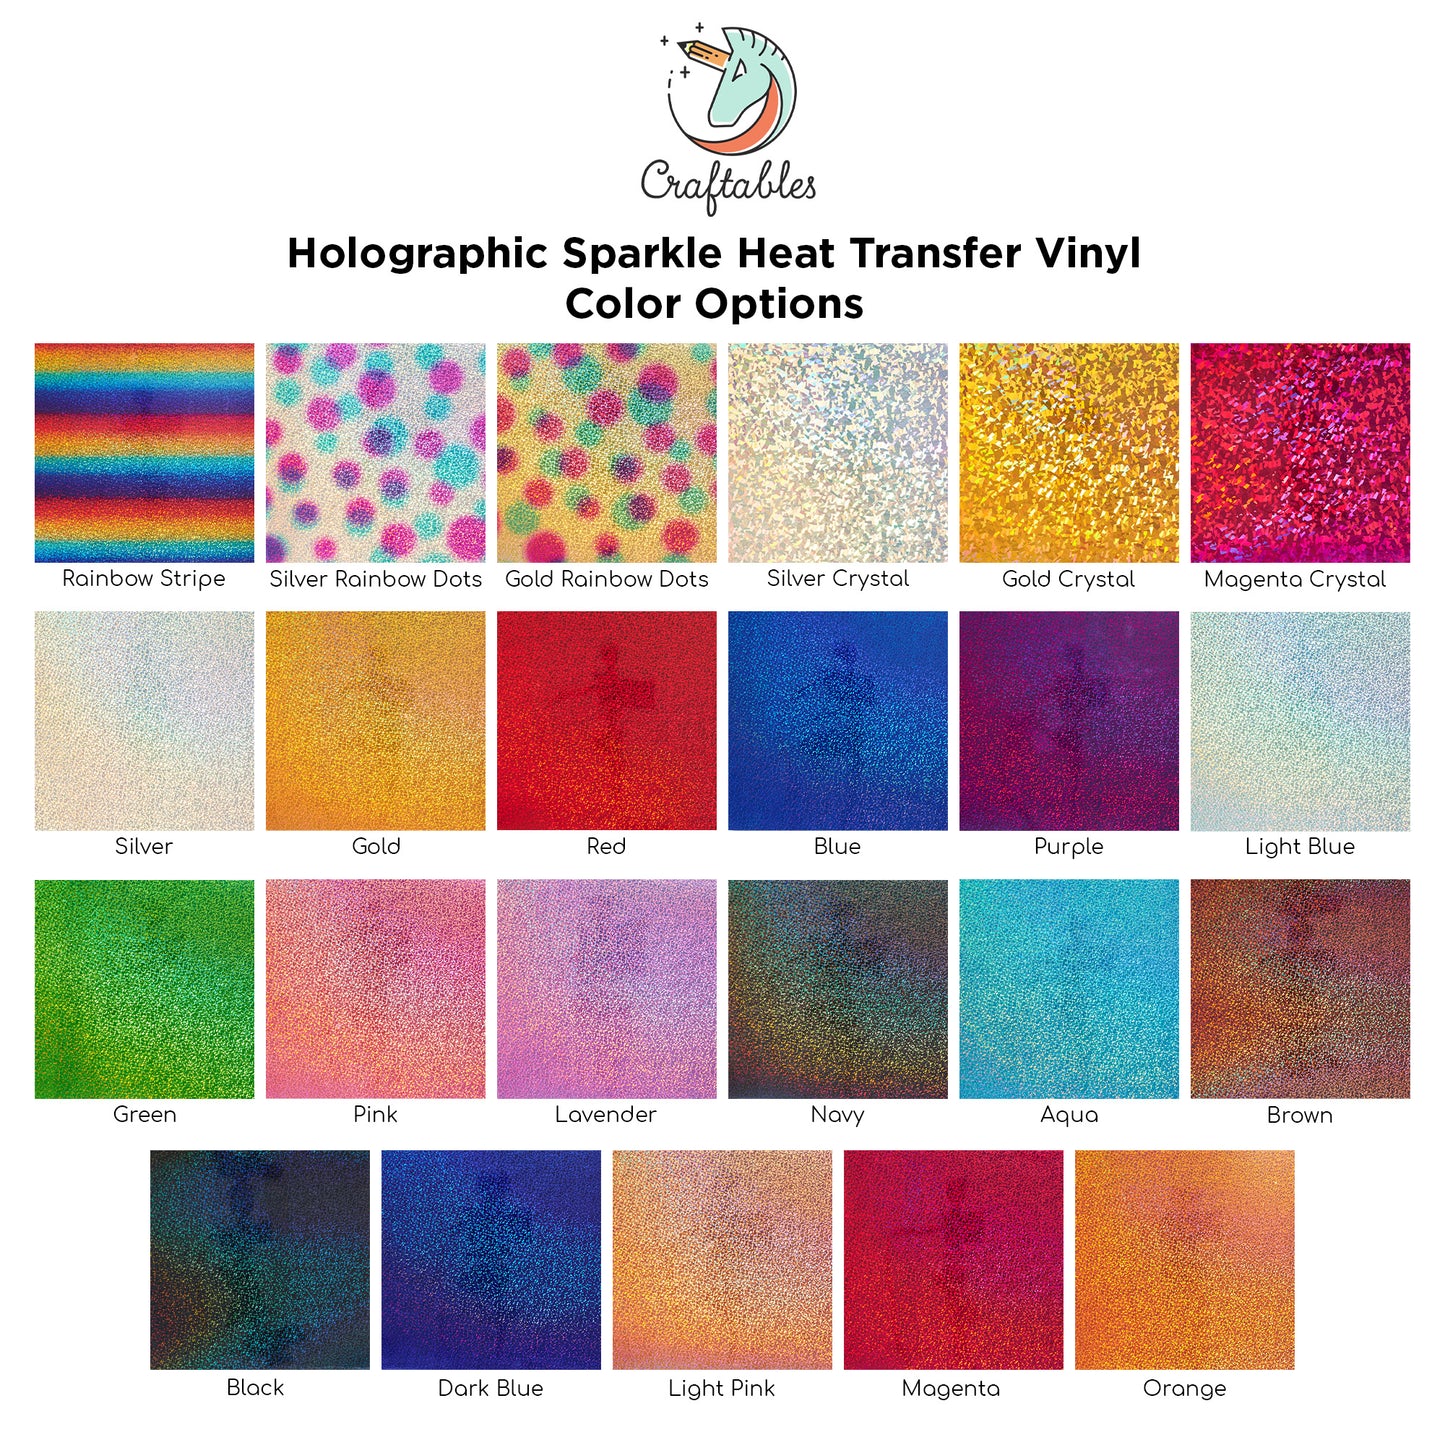 Gold Holographic Sparkle Heat Transfer Vinyl Rolls By Craftables